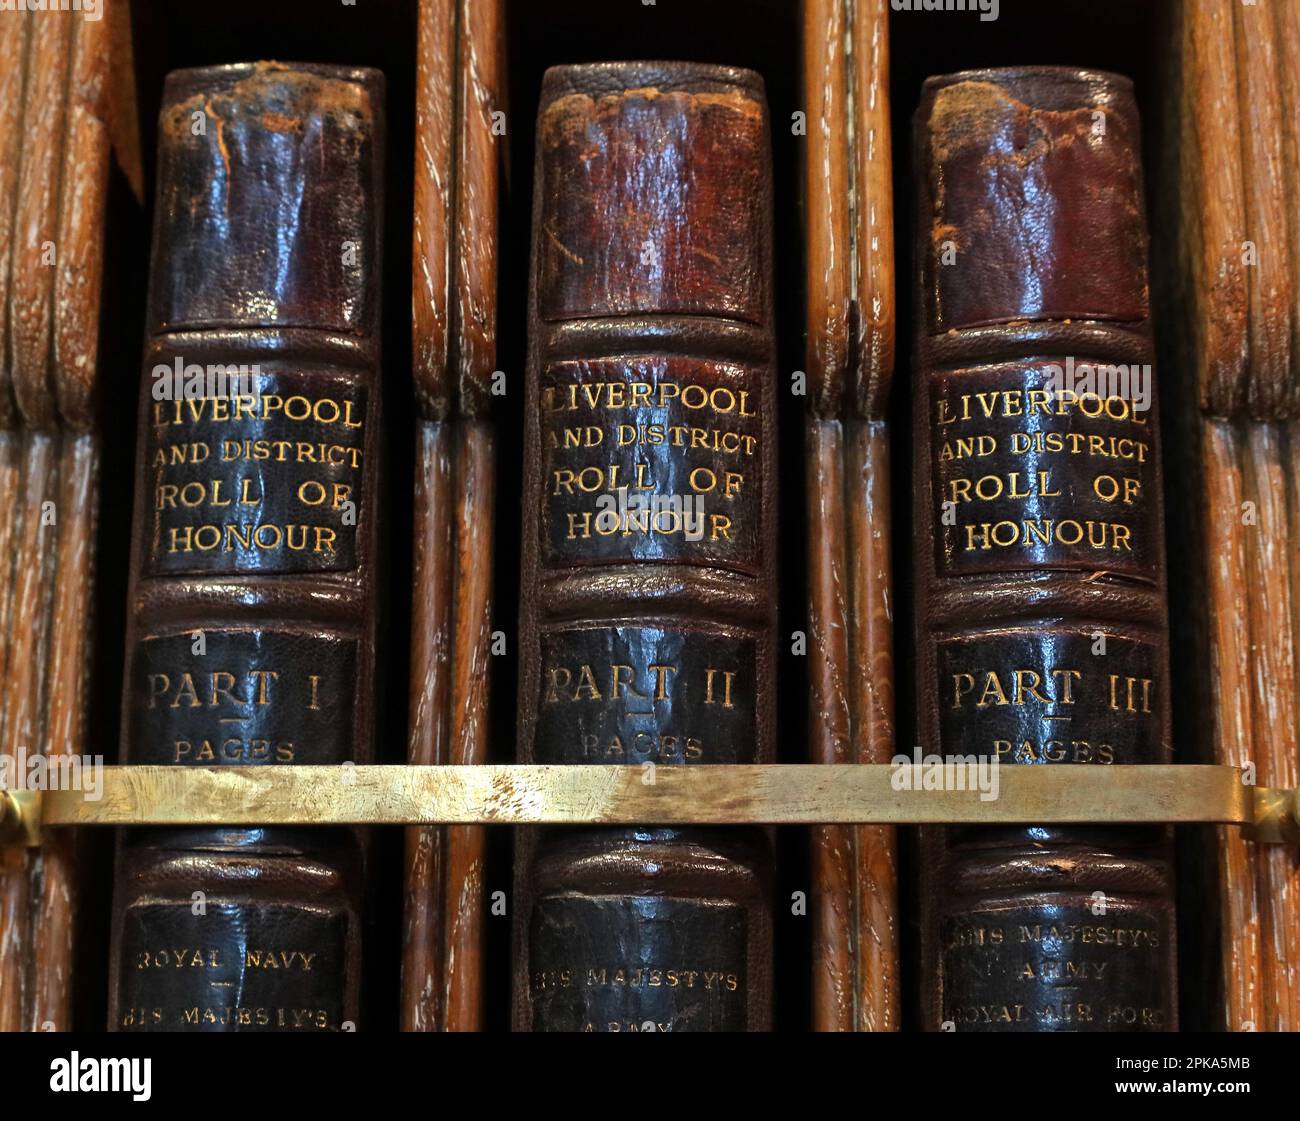 Leather bound volumes of Liverpool and District, Roll of Honour, parts 1-3, in Liverpool Anglican Cathedral, St James Mt, Liverpool, Merseyside,L1 7AZ Stock Photo